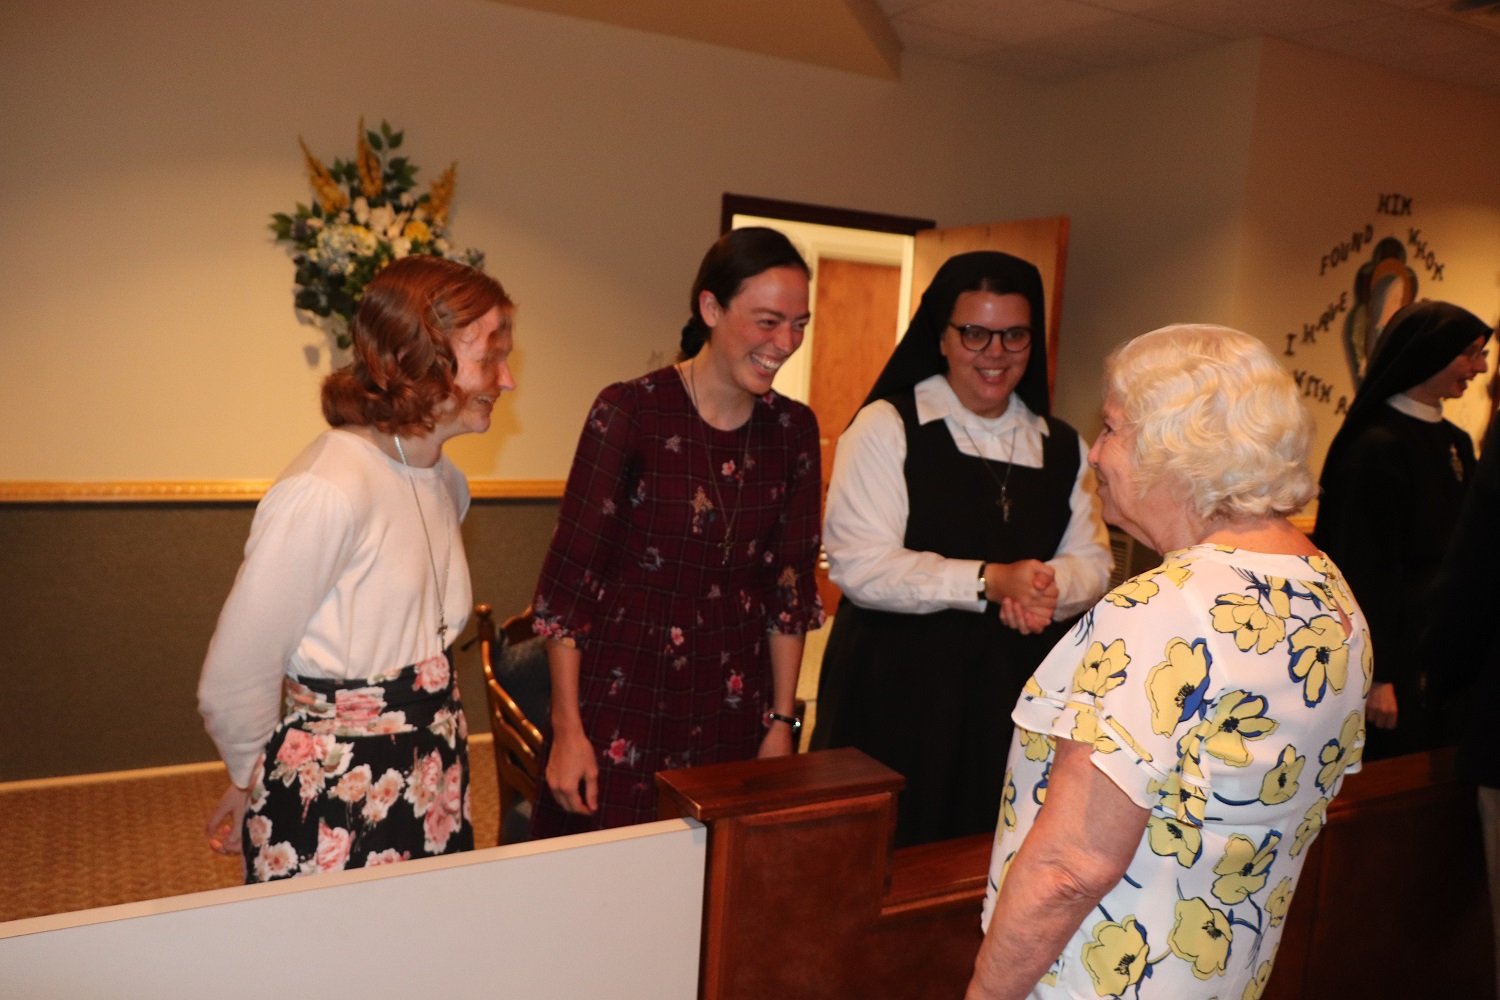  One of our Passionist Oblates speaks with the novitiate members 